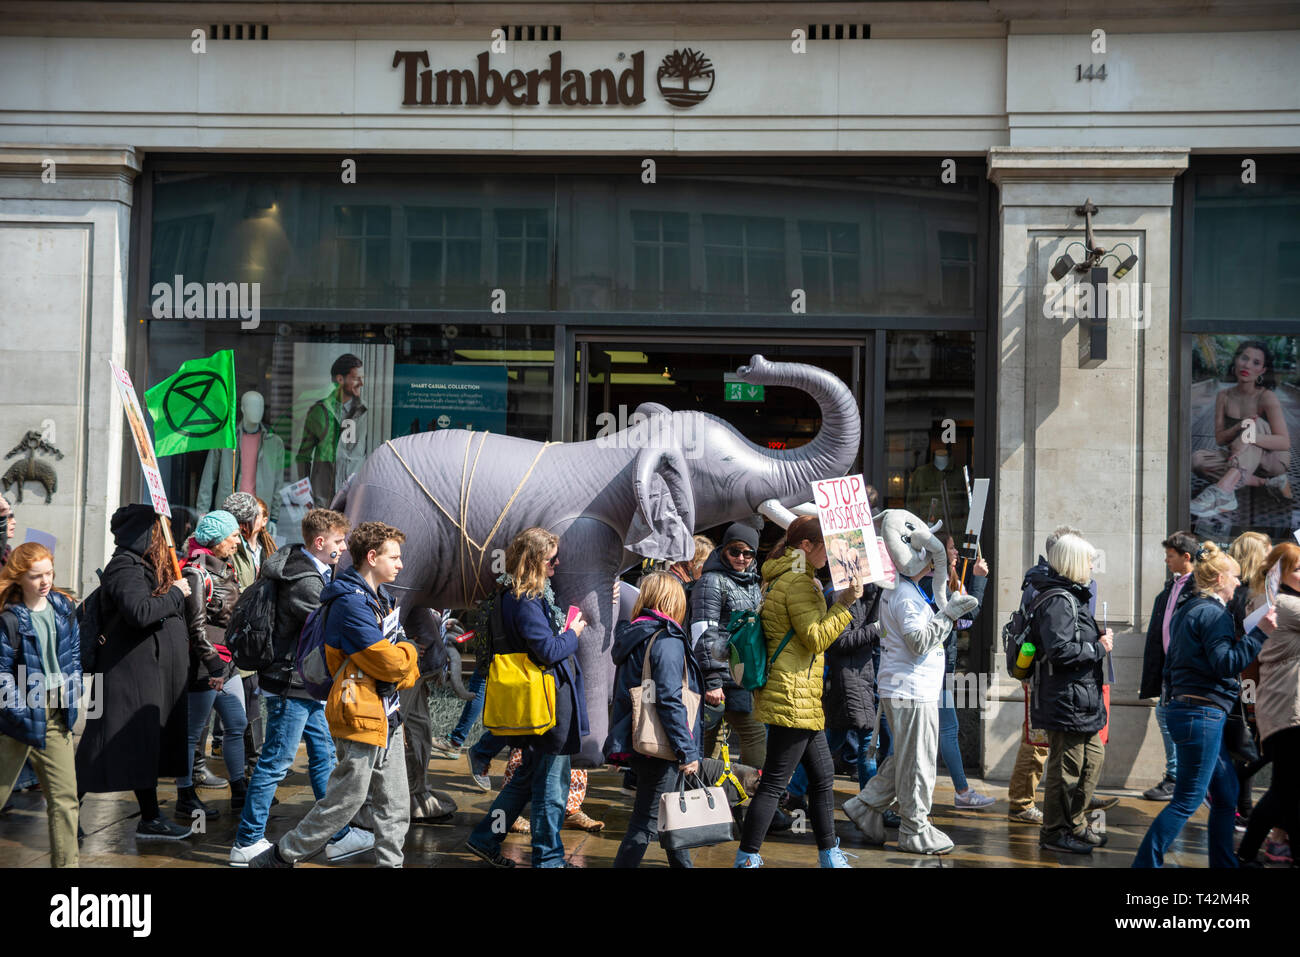 Protesters carry an inflatable elephant through streets of london at a stop trophy hunting and ivory trade protest rally, London, UK passing Timberland shop store Stock Photo